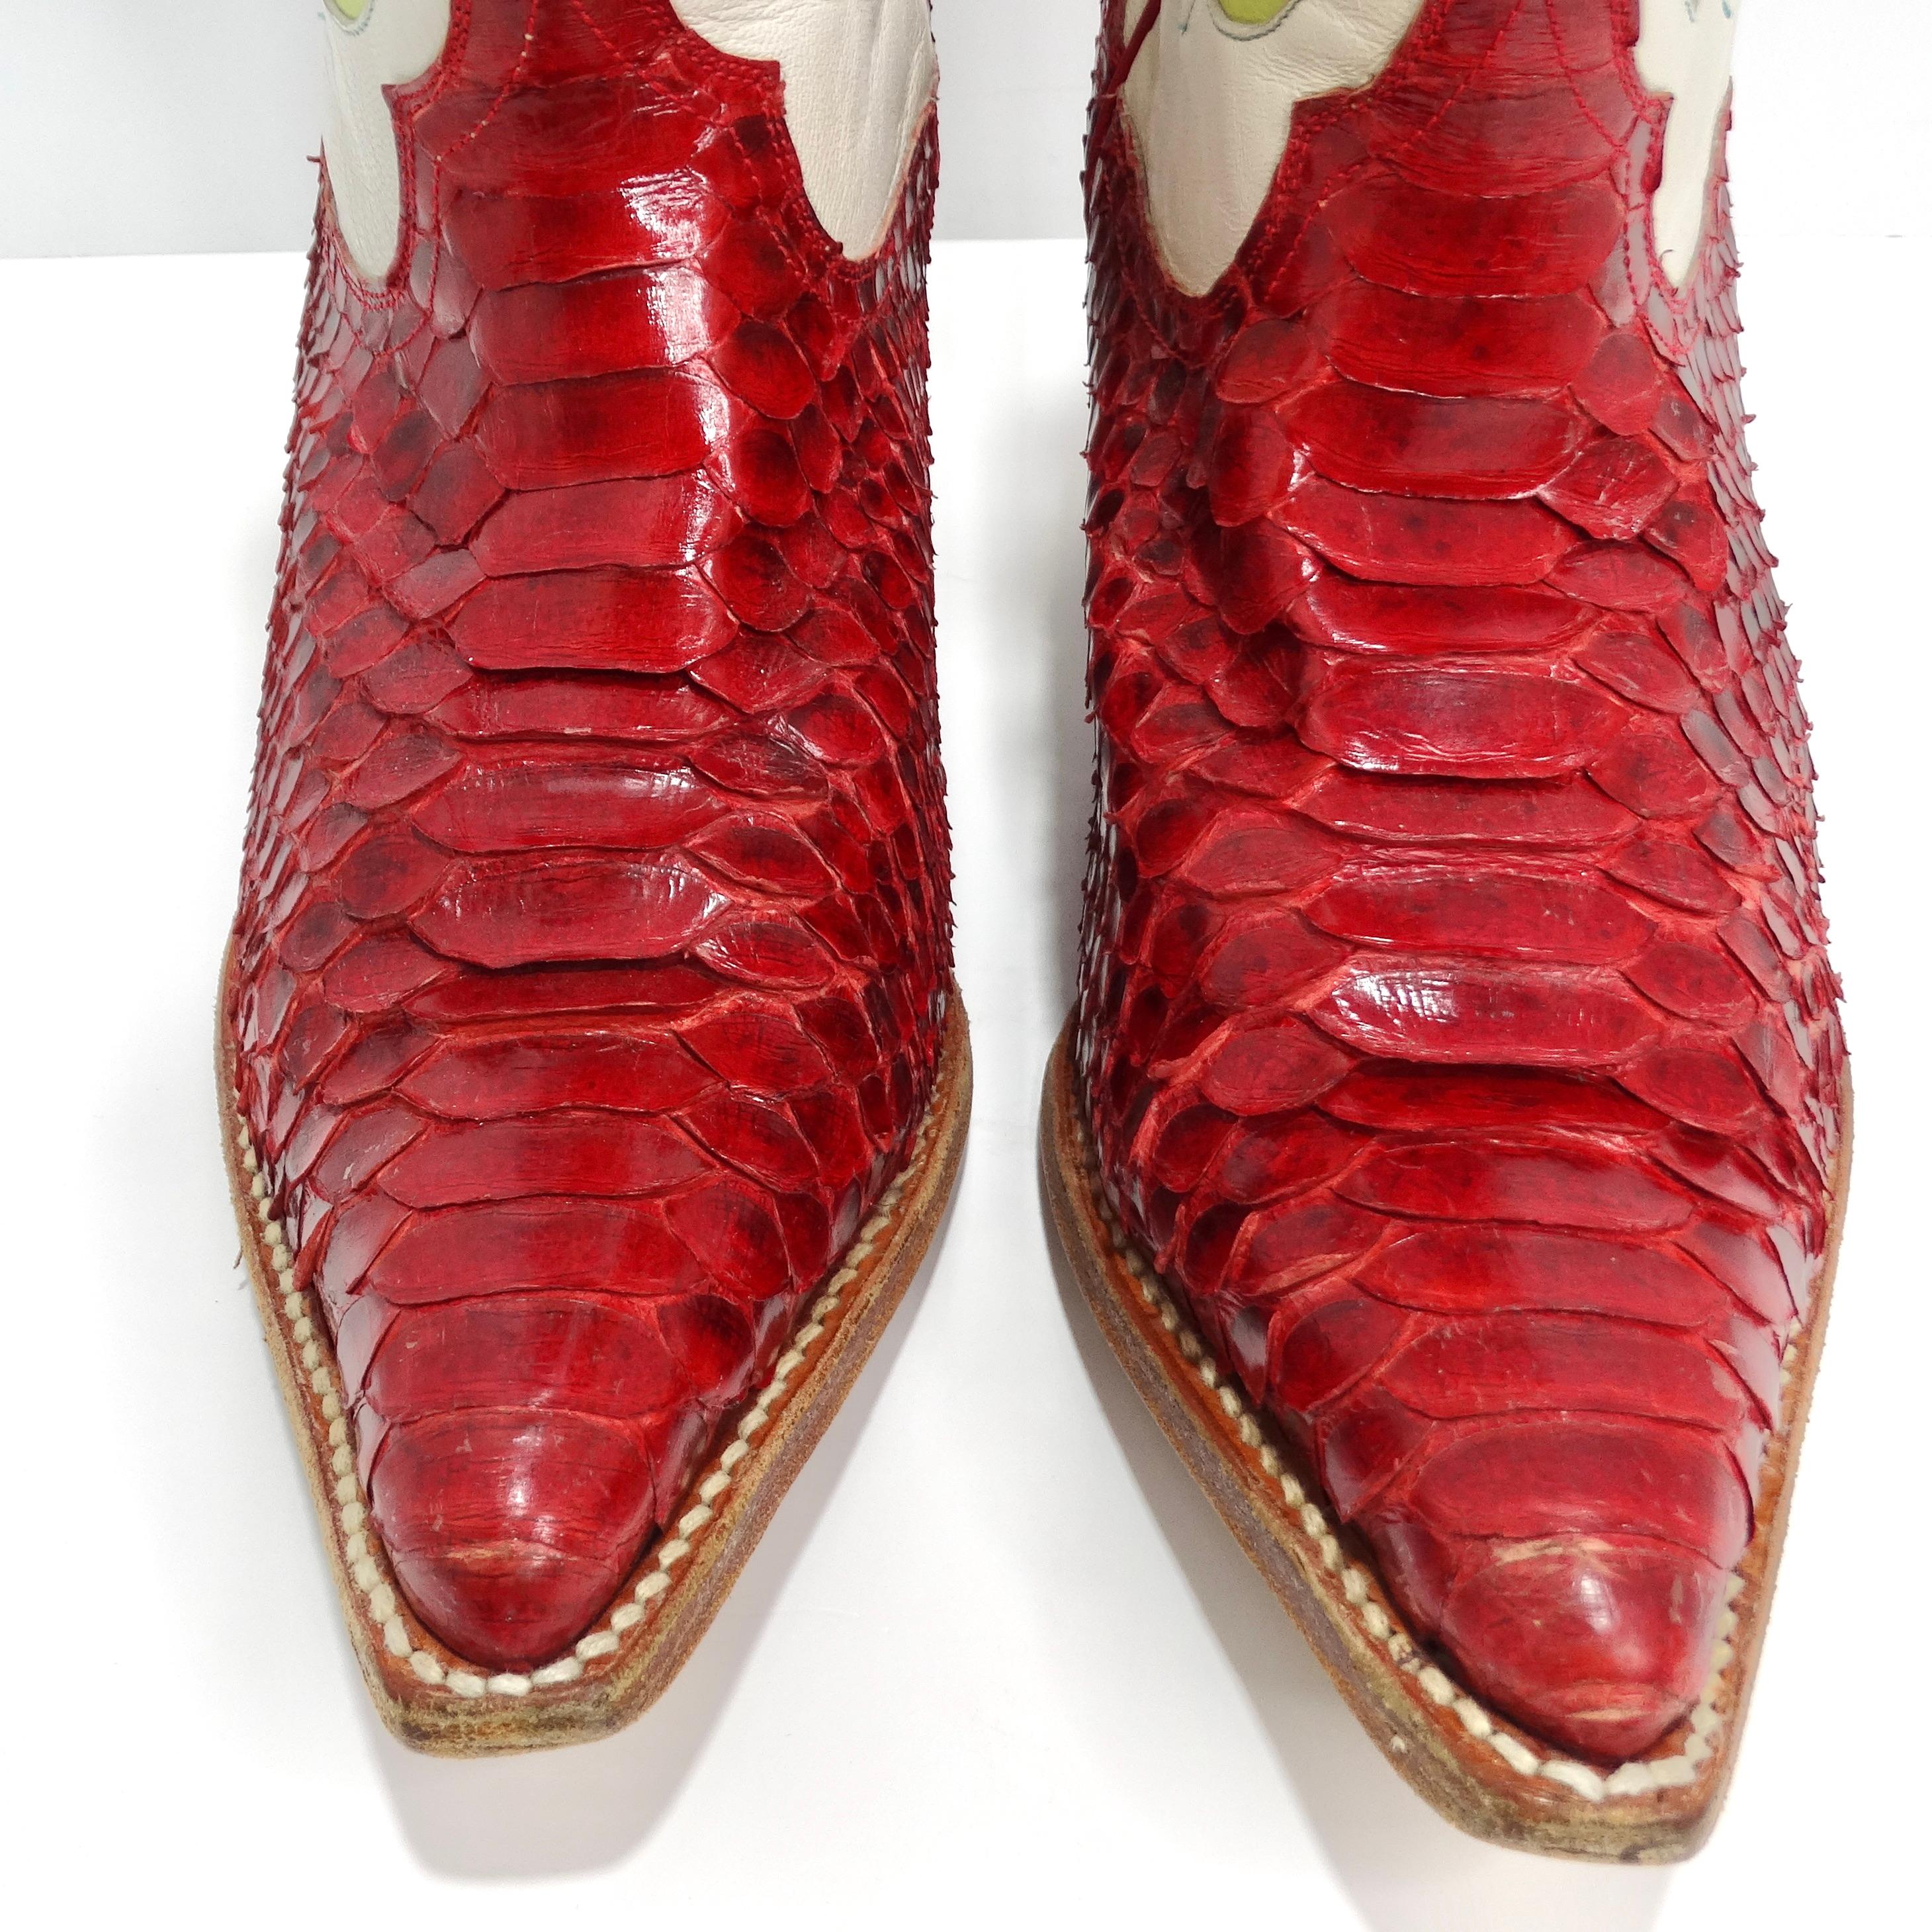 Tony Mora Red Python Floral Cowboy Boots In Good Condition For Sale In Scottsdale, AZ